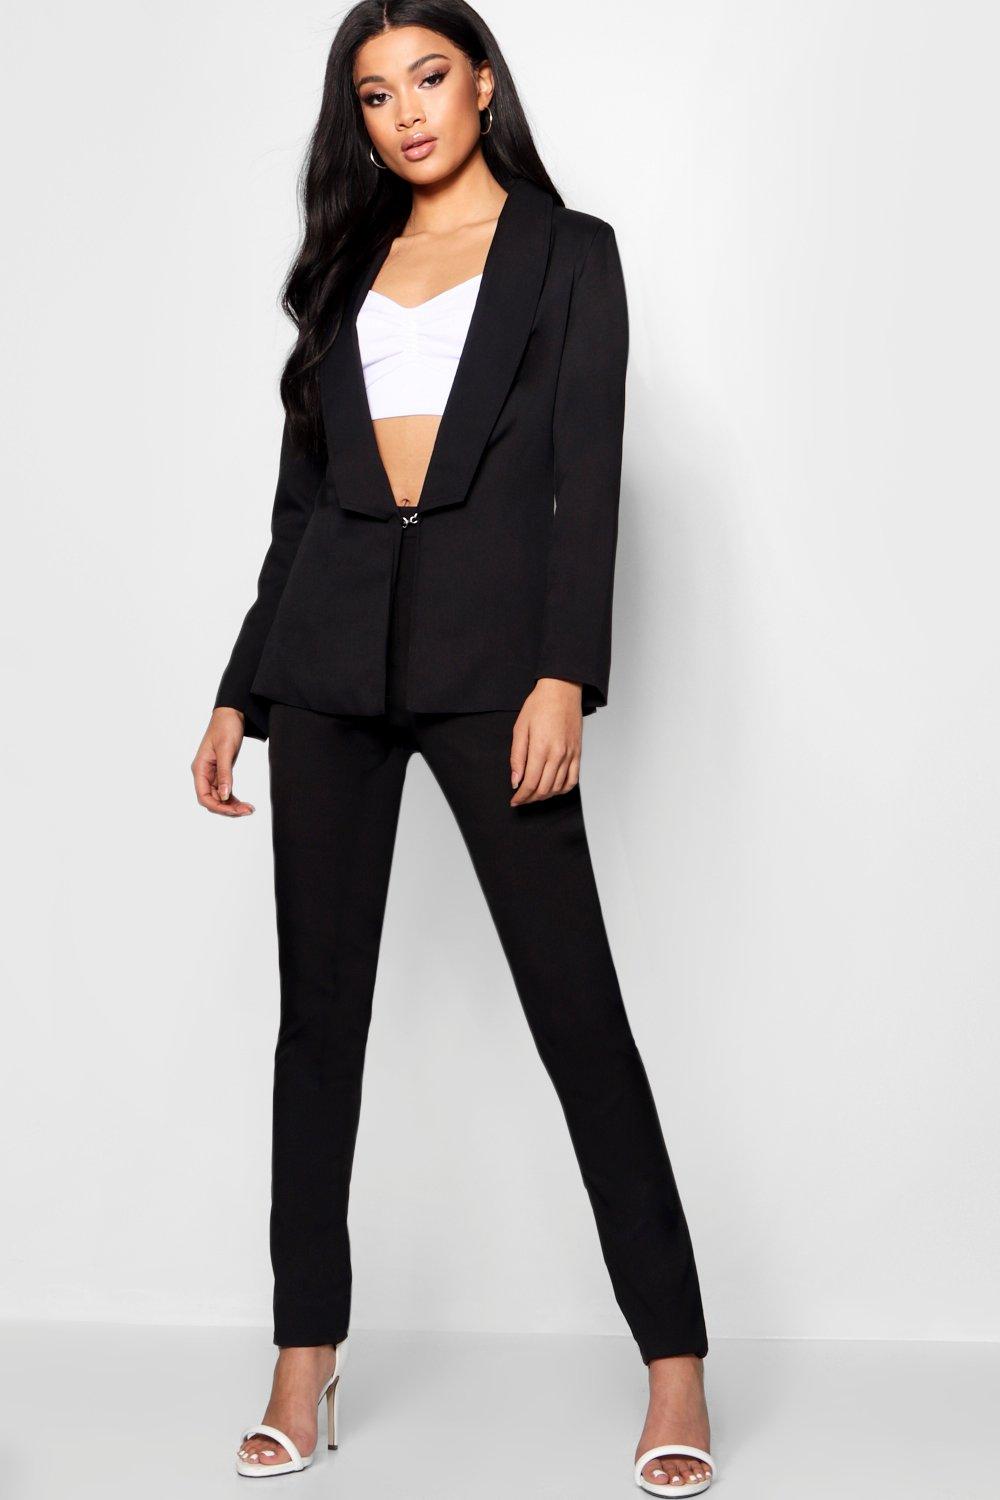 occasion trouser suits